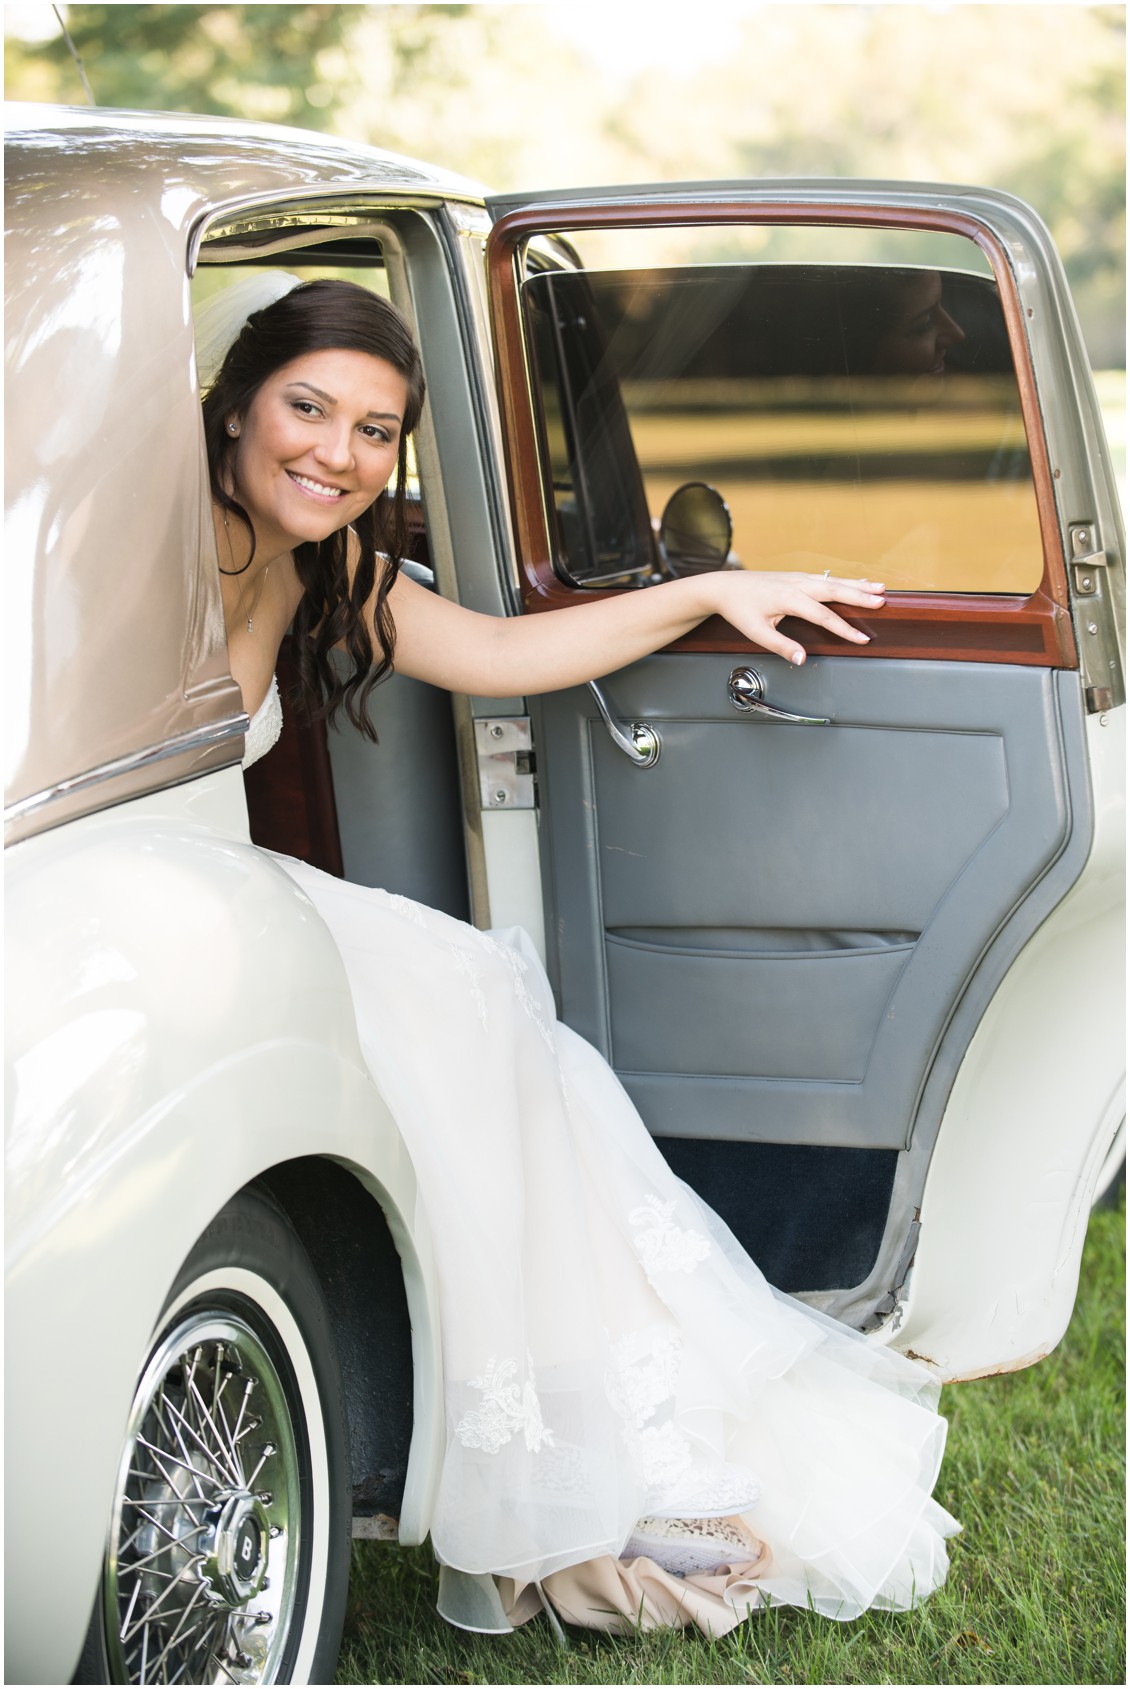 Eastern Shore bride in vintage Rolls Royce going to her wedding Melissa Grimes-Guy Photography